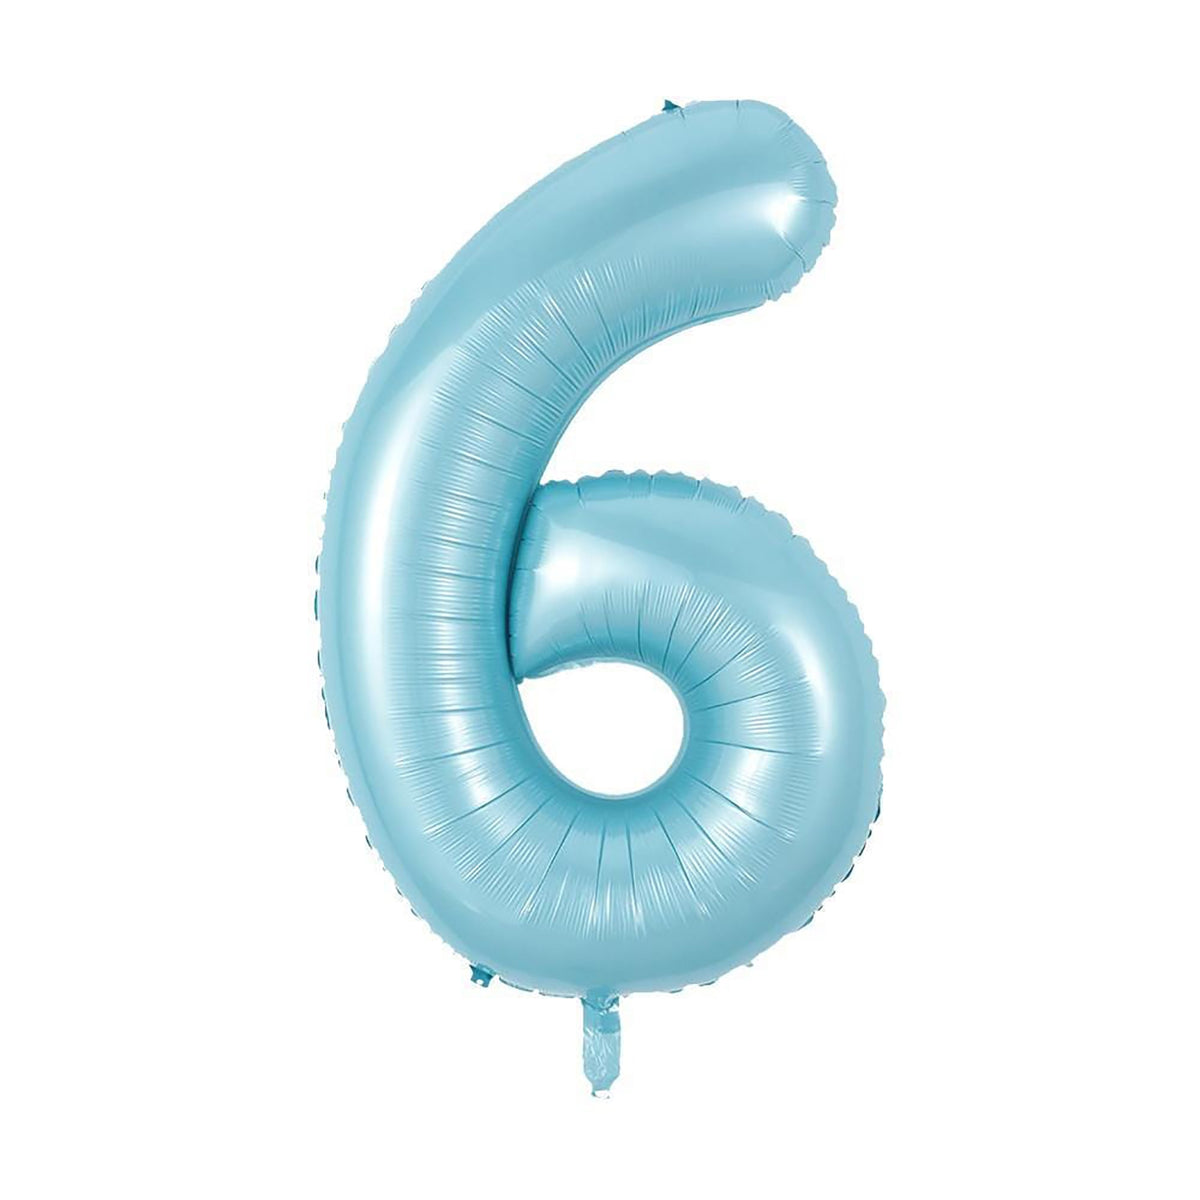 BOOMBA INTERNATIONAL TRADING CO,. LTD Balloons Pastel Blue Number 6 Supershape Foil Balloon, 40 Inches, 1 Count 810077659717